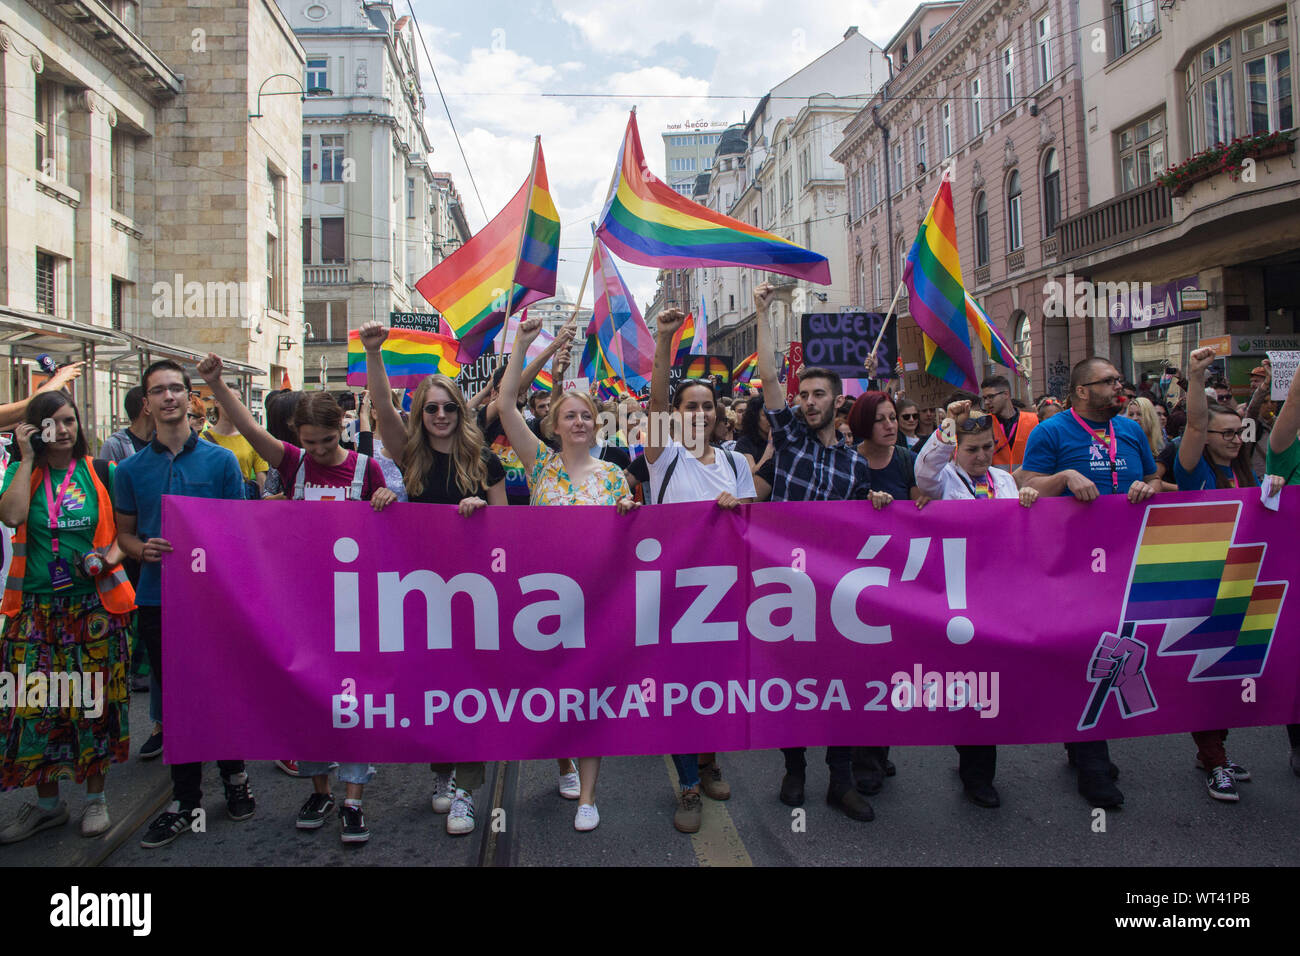 September 8, 2019, Sarajevo, Bosnia and Herzegovina: Protesters march with a huge banner and rainbow flags during the pride parade..''Ima Izac!'' translated as ''Open the door, please'' was the motto of the first Bosnian LGBTIQ pride parade, It's a request for more freedom in a country still endangered by religious radicalism. The parade represented an historical moment in Bosnian history. (Credit Image: © Pierpaolo Totti/SOPA Images via ZUMA Wire) Stock Photo